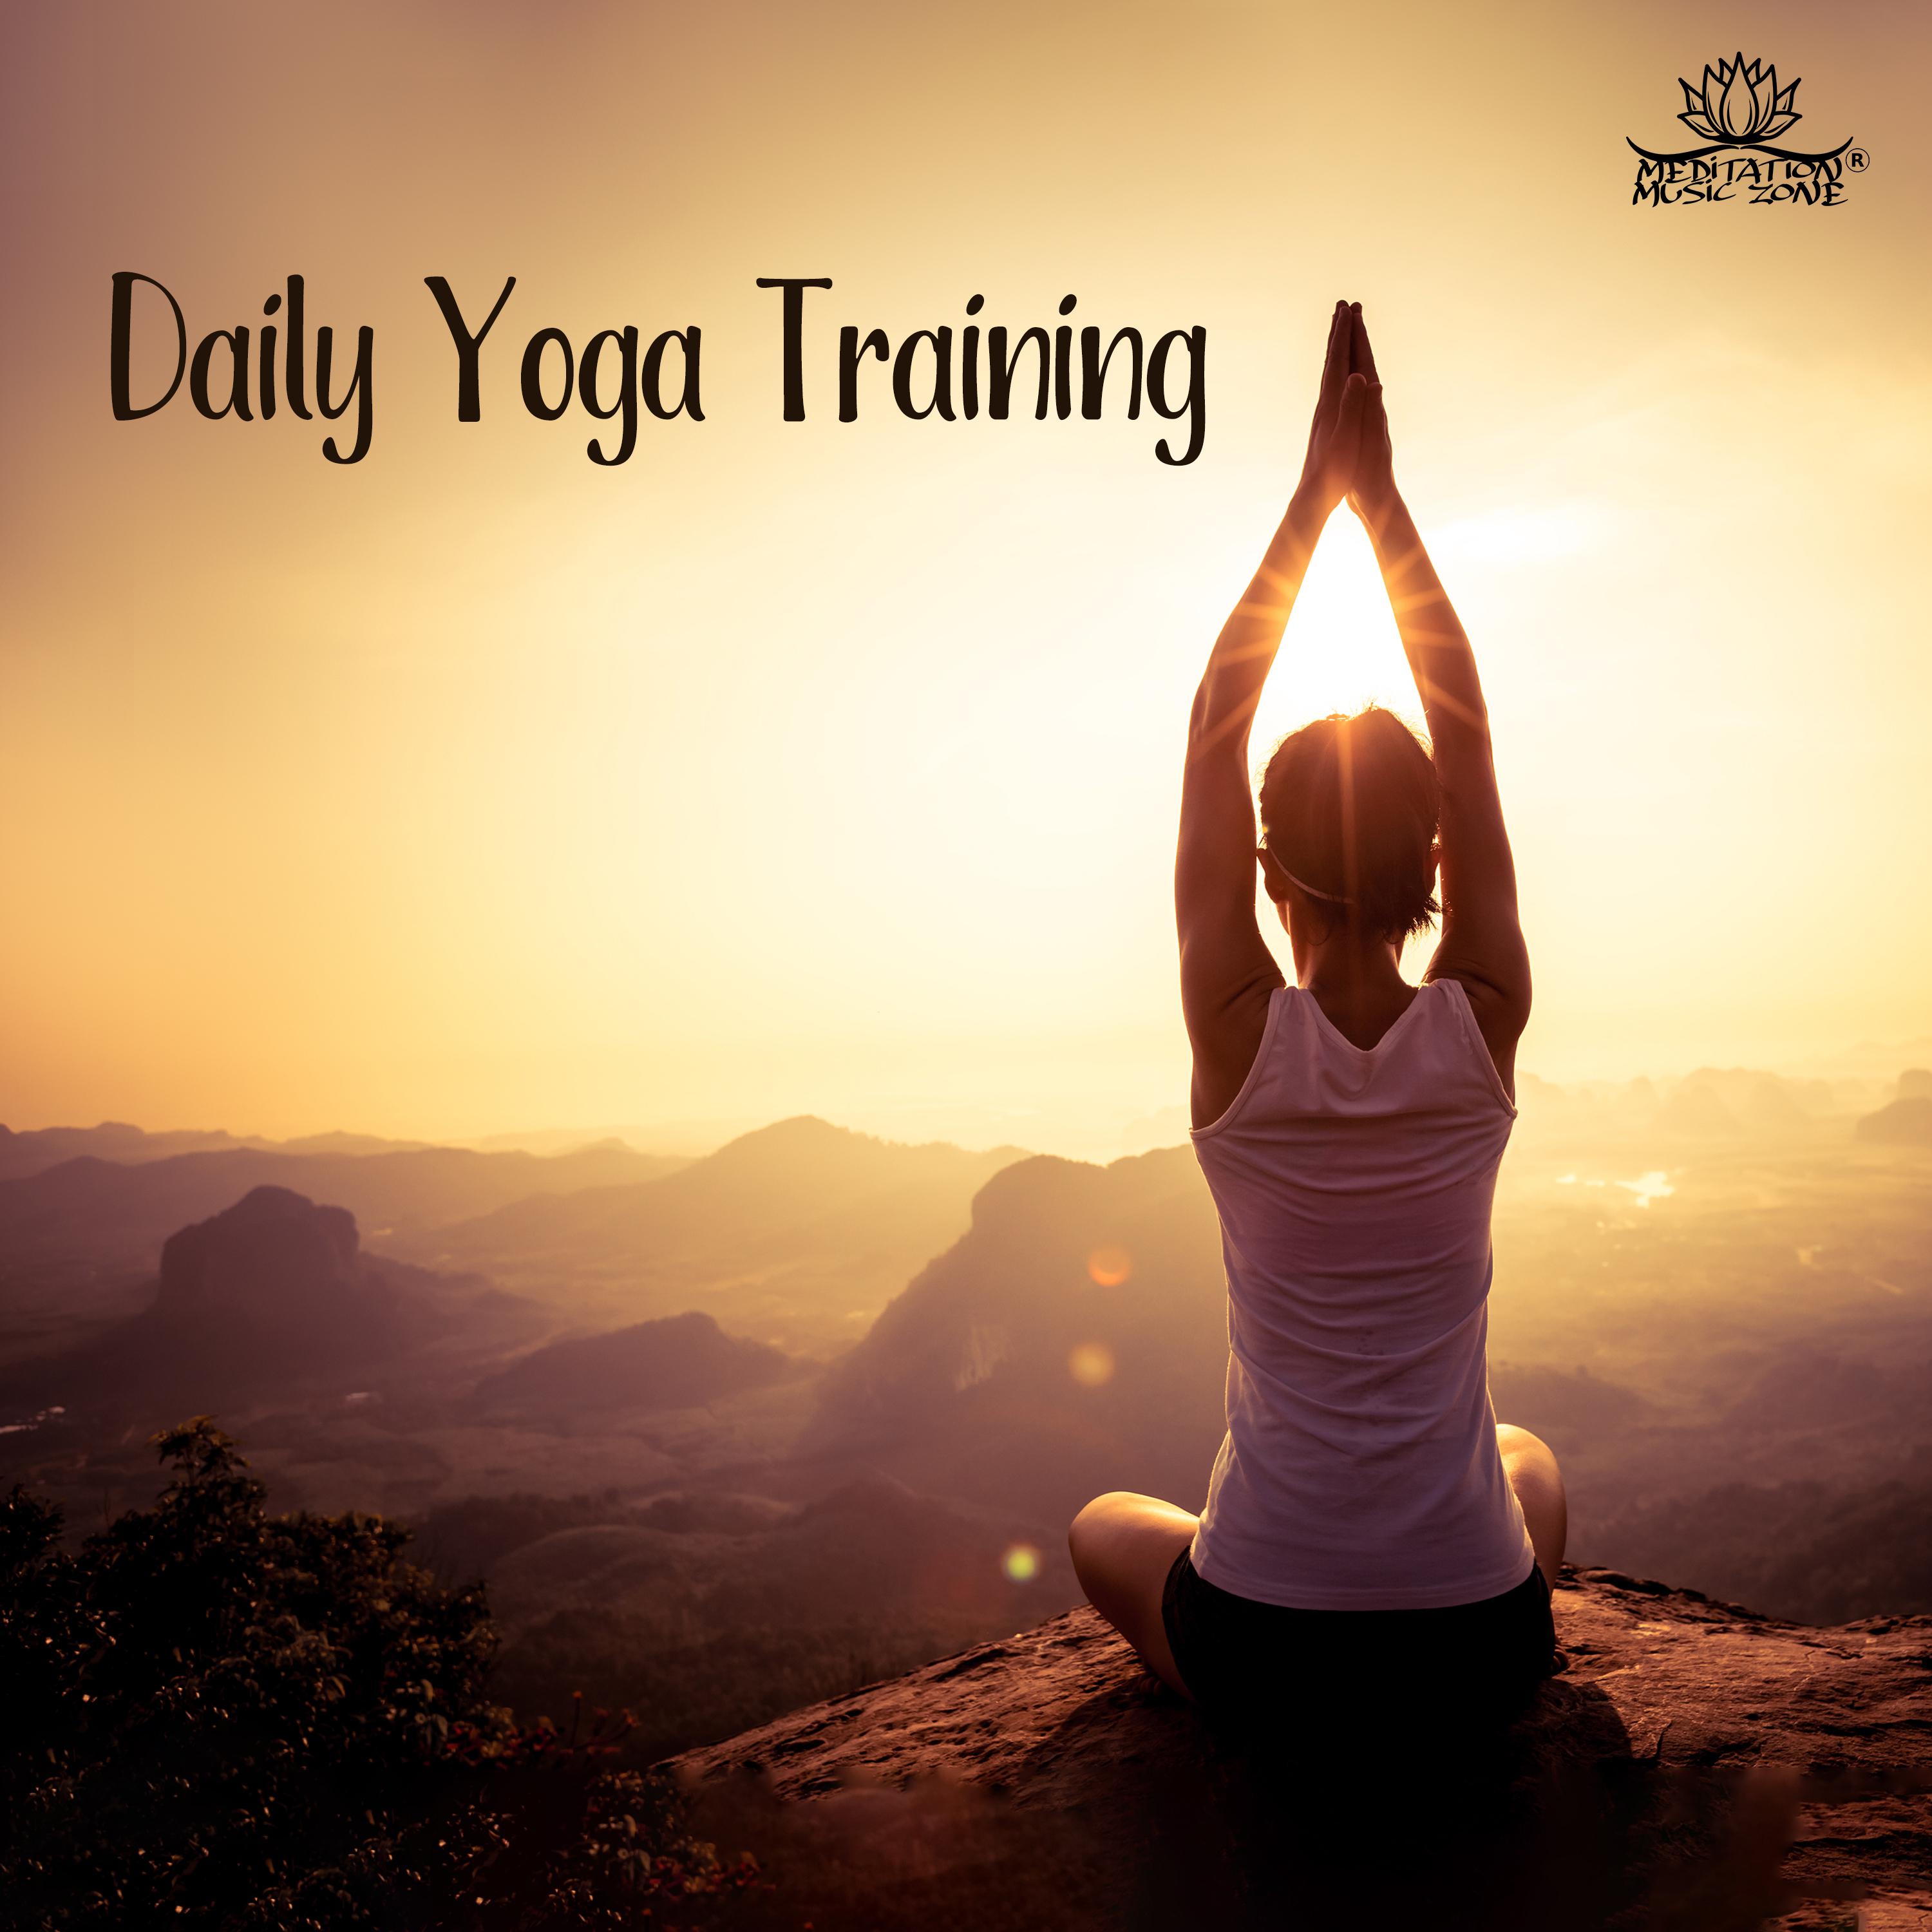 Daily Yoga Training (The Best Top 2019 of Yoga Tracks)